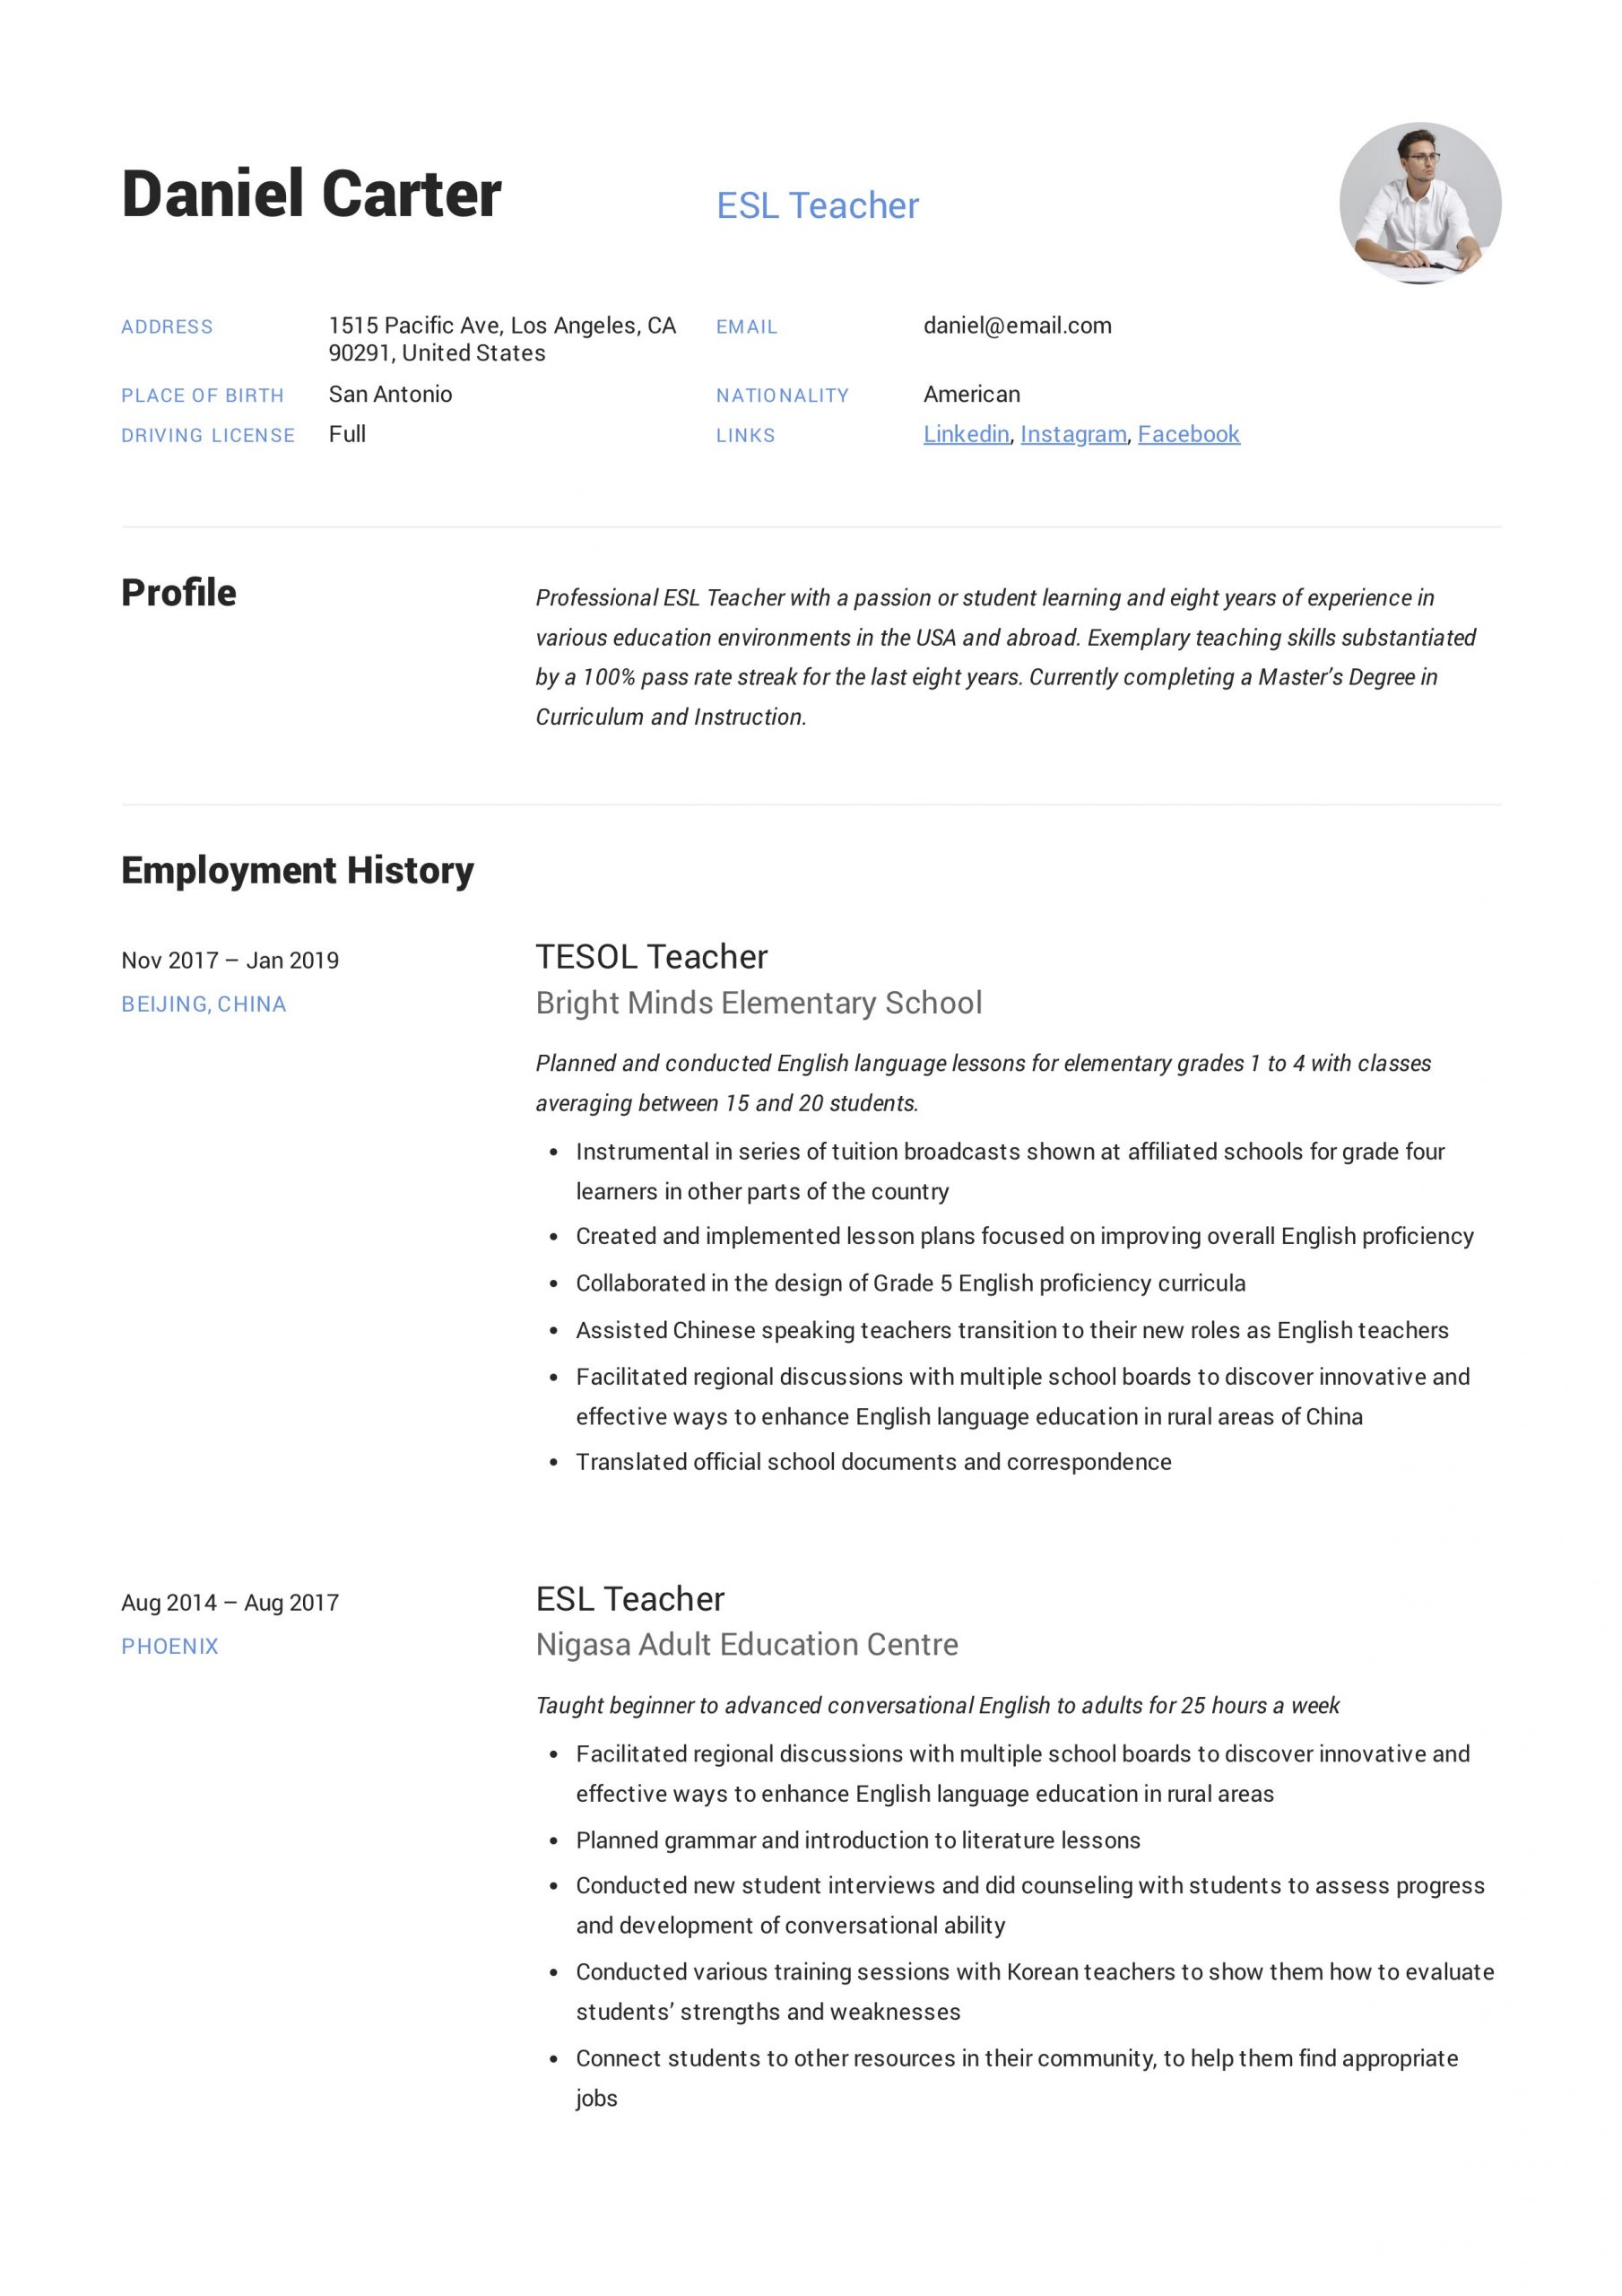 Sample Resume for Online English Tutor without Experience Online English Teacher Resume